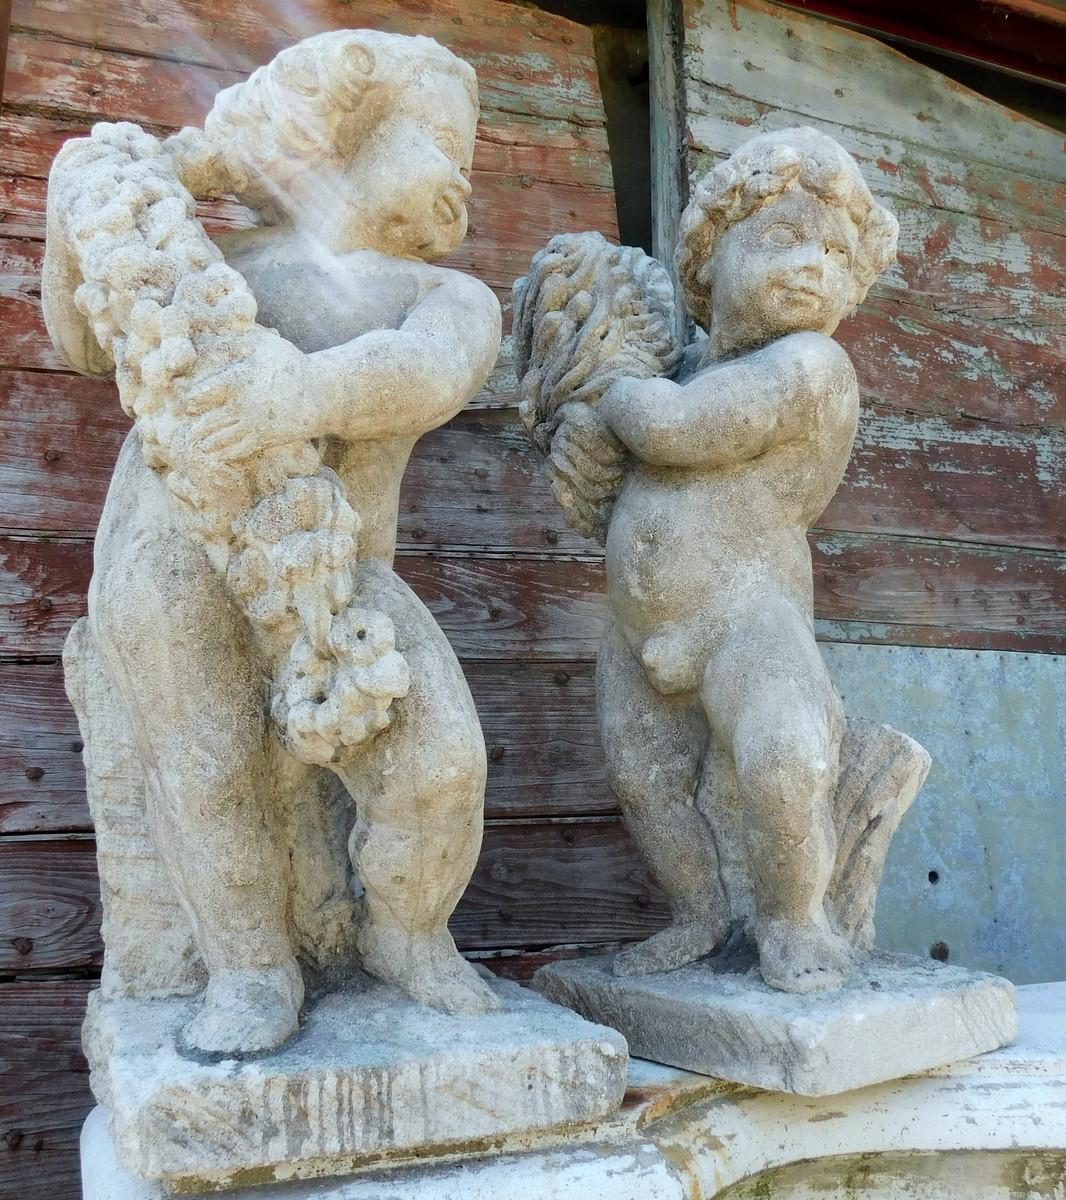 Pair of statues, hand-made sculptures depicting festive cherubs in stone, sold in pairs and very beautiful if arranged in an entrance or garden, built in the 1900s in Italy.
Measure each cm H 90 x W 30 x D 35.